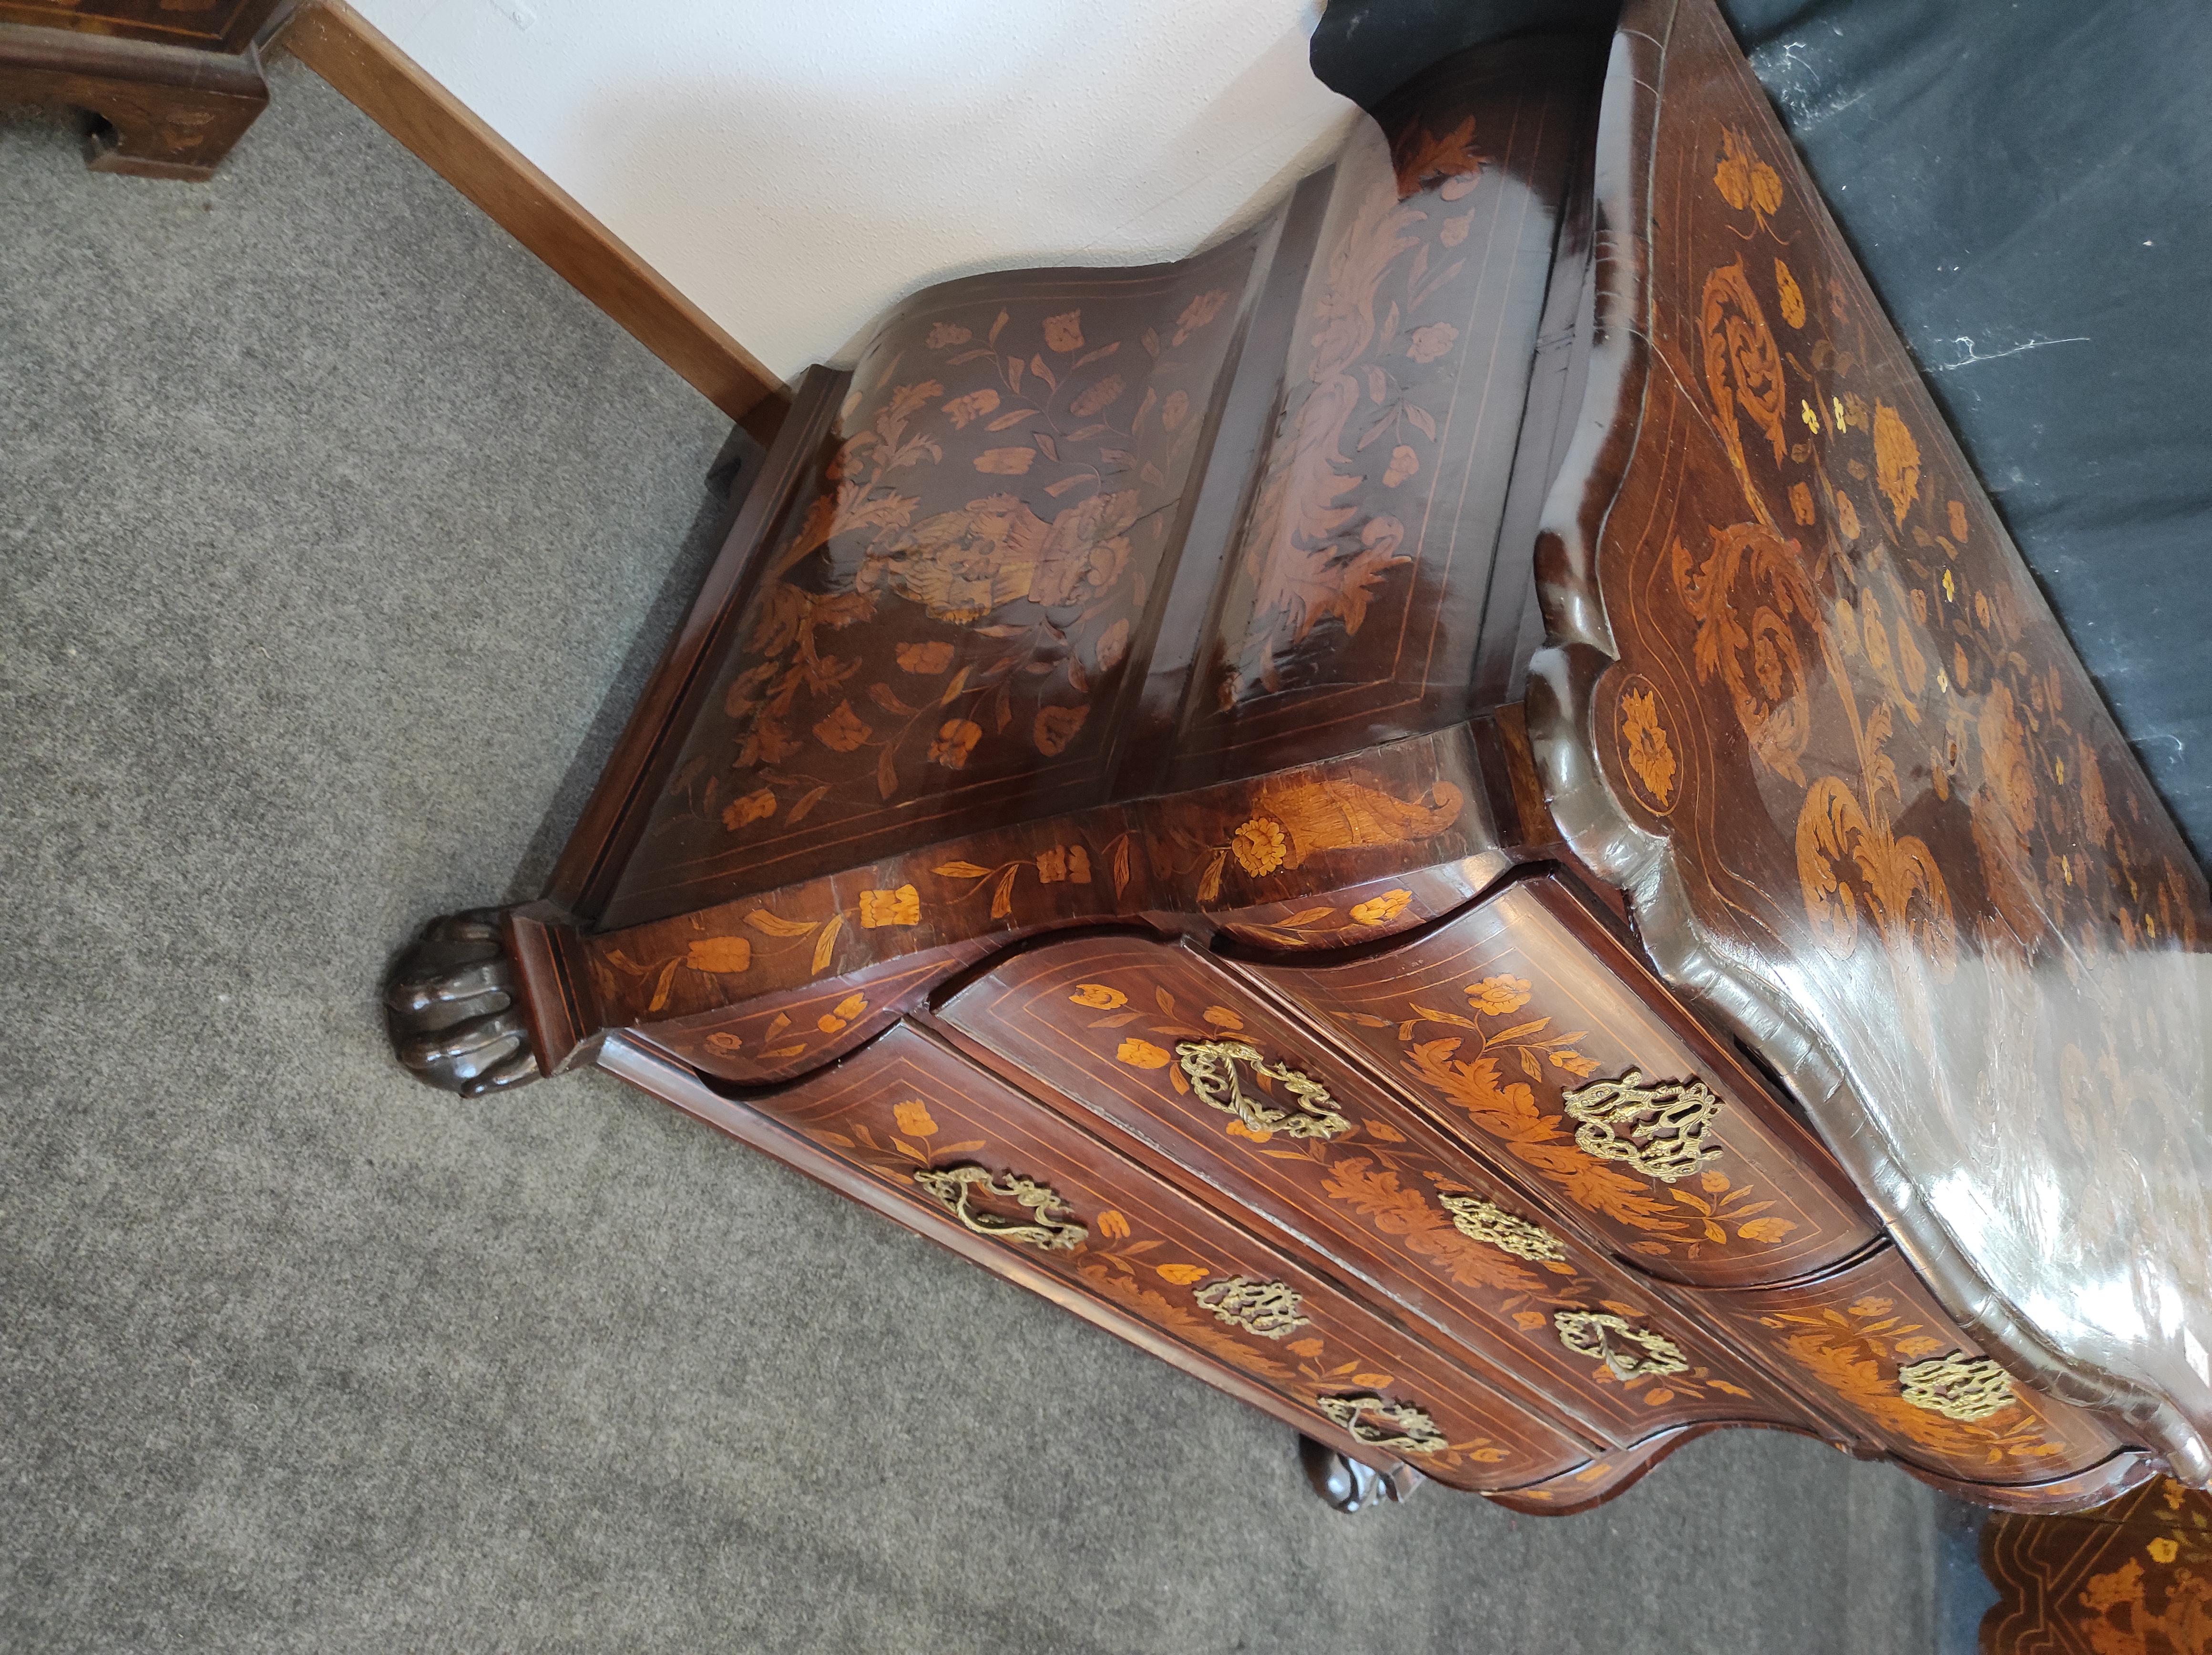 Late 1700s inlaid dresser from Holland.
This dresser is small in size but enormously elegant is wavy at the sides and inlaid with floral motifs on each side.
I bought it in France but it's Dutch
The interior of the drawers is oak.
It has already